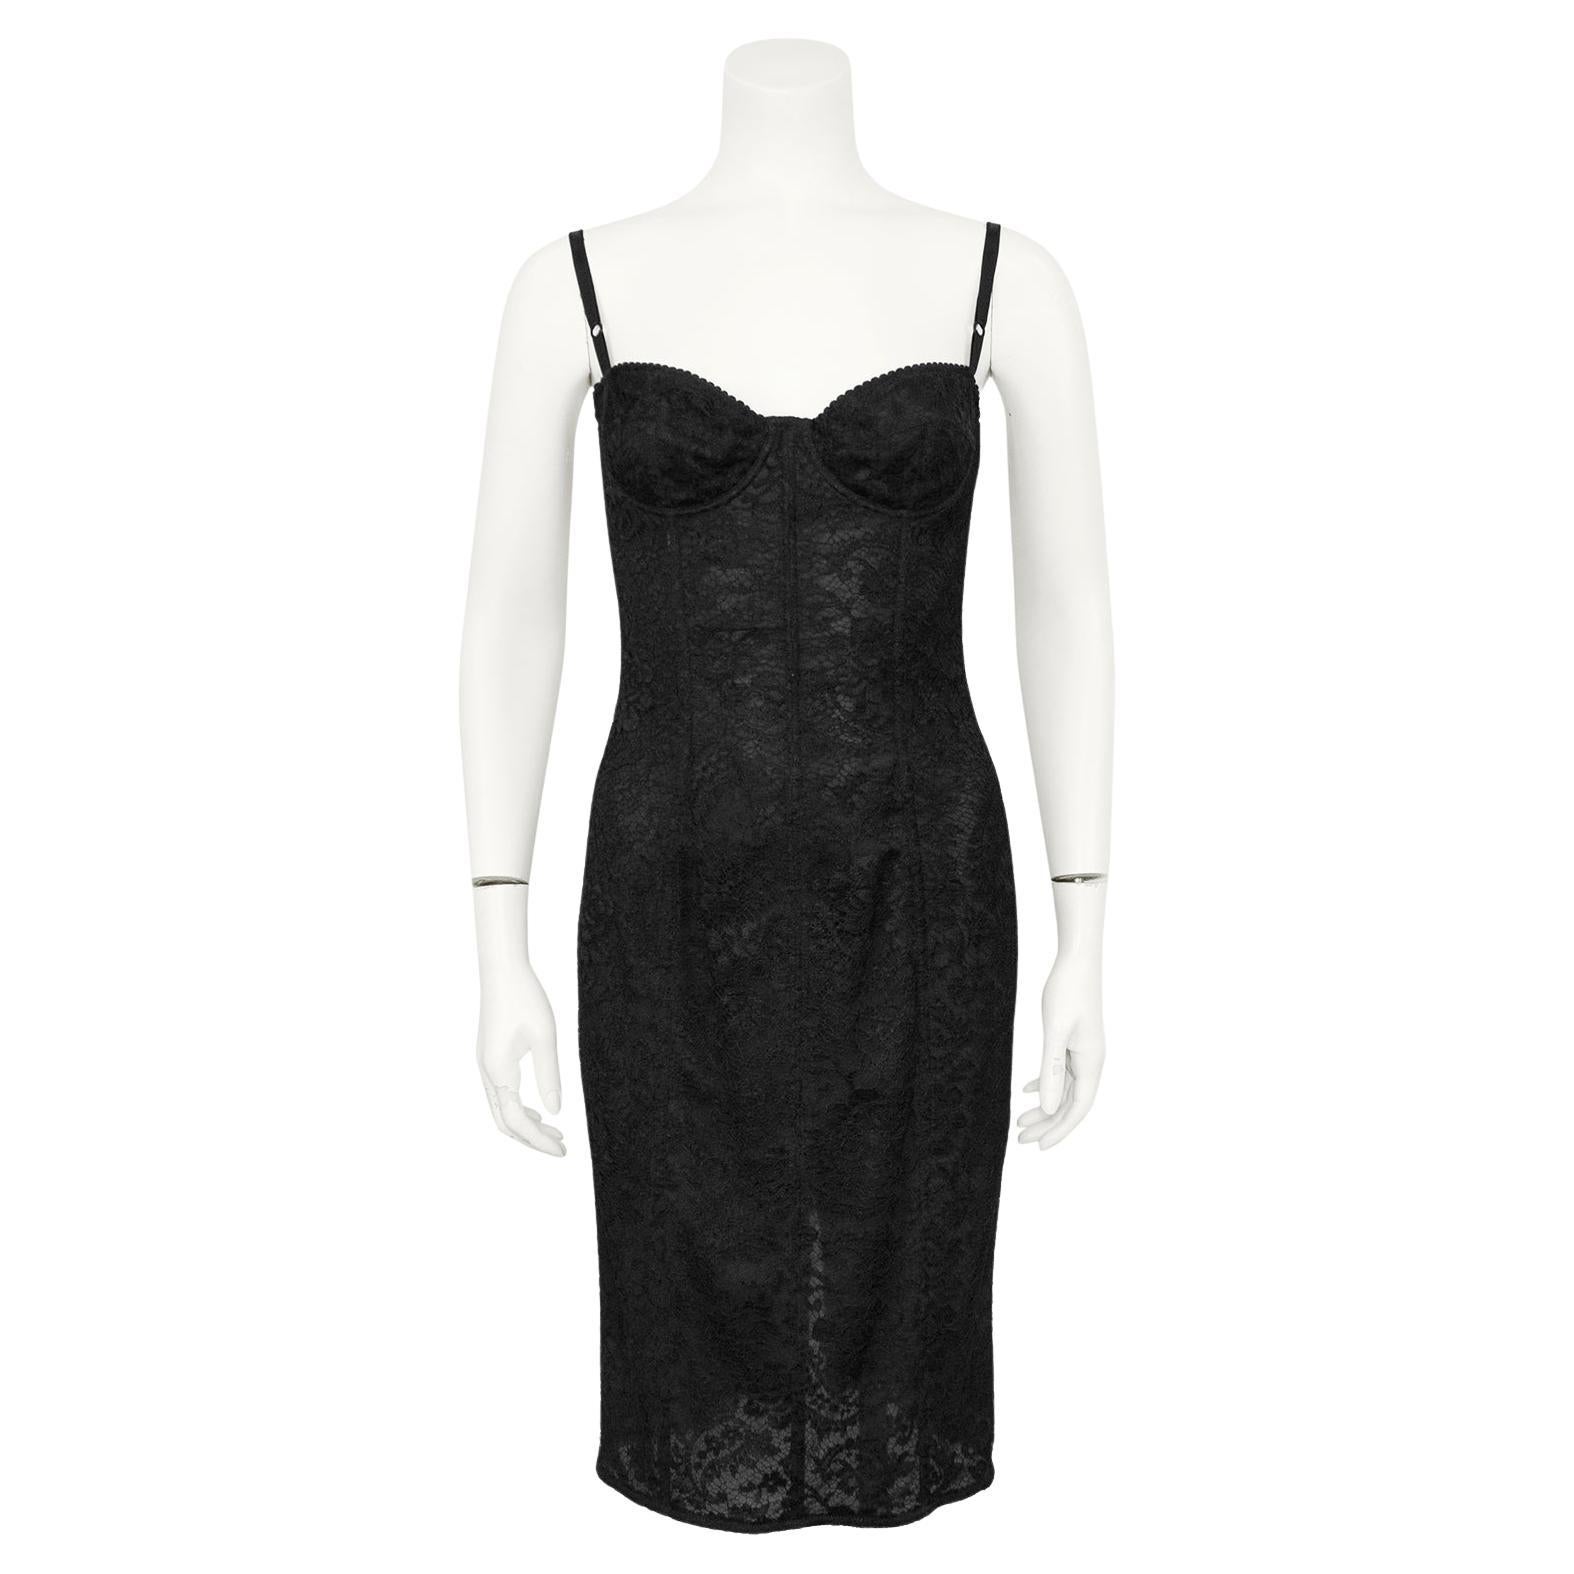 Early 2000s Dolce and Gabbana Black Lace Cocktail Dress For Sale